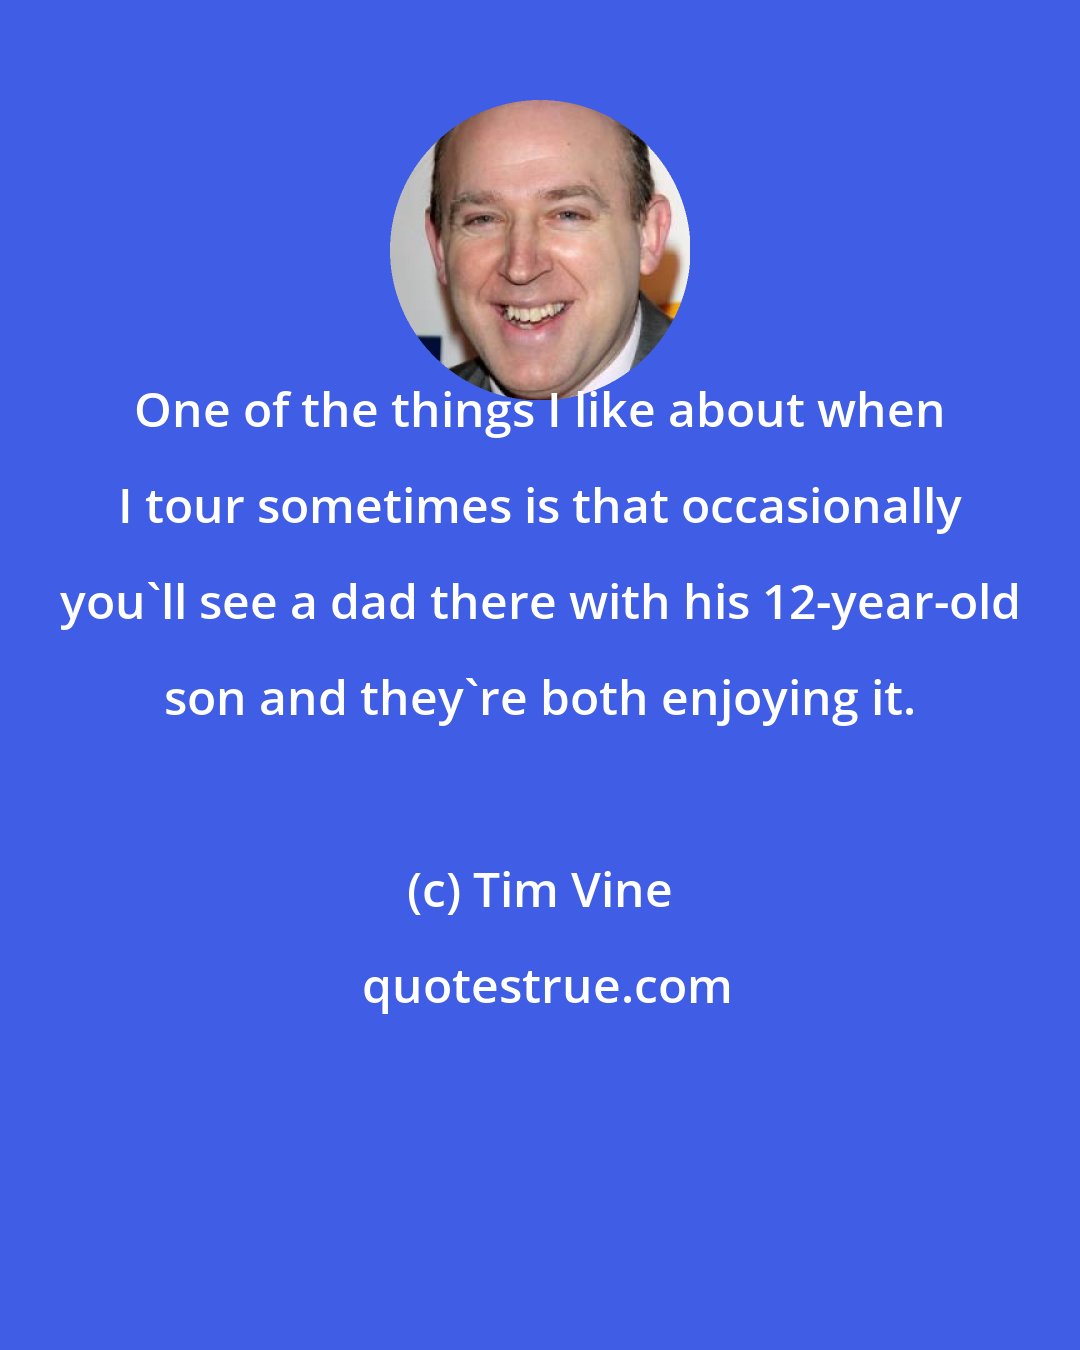 Tim Vine: One of the things I like about when I tour sometimes is that occasionally you'll see a dad there with his 12-year-old son and they're both enjoying it.